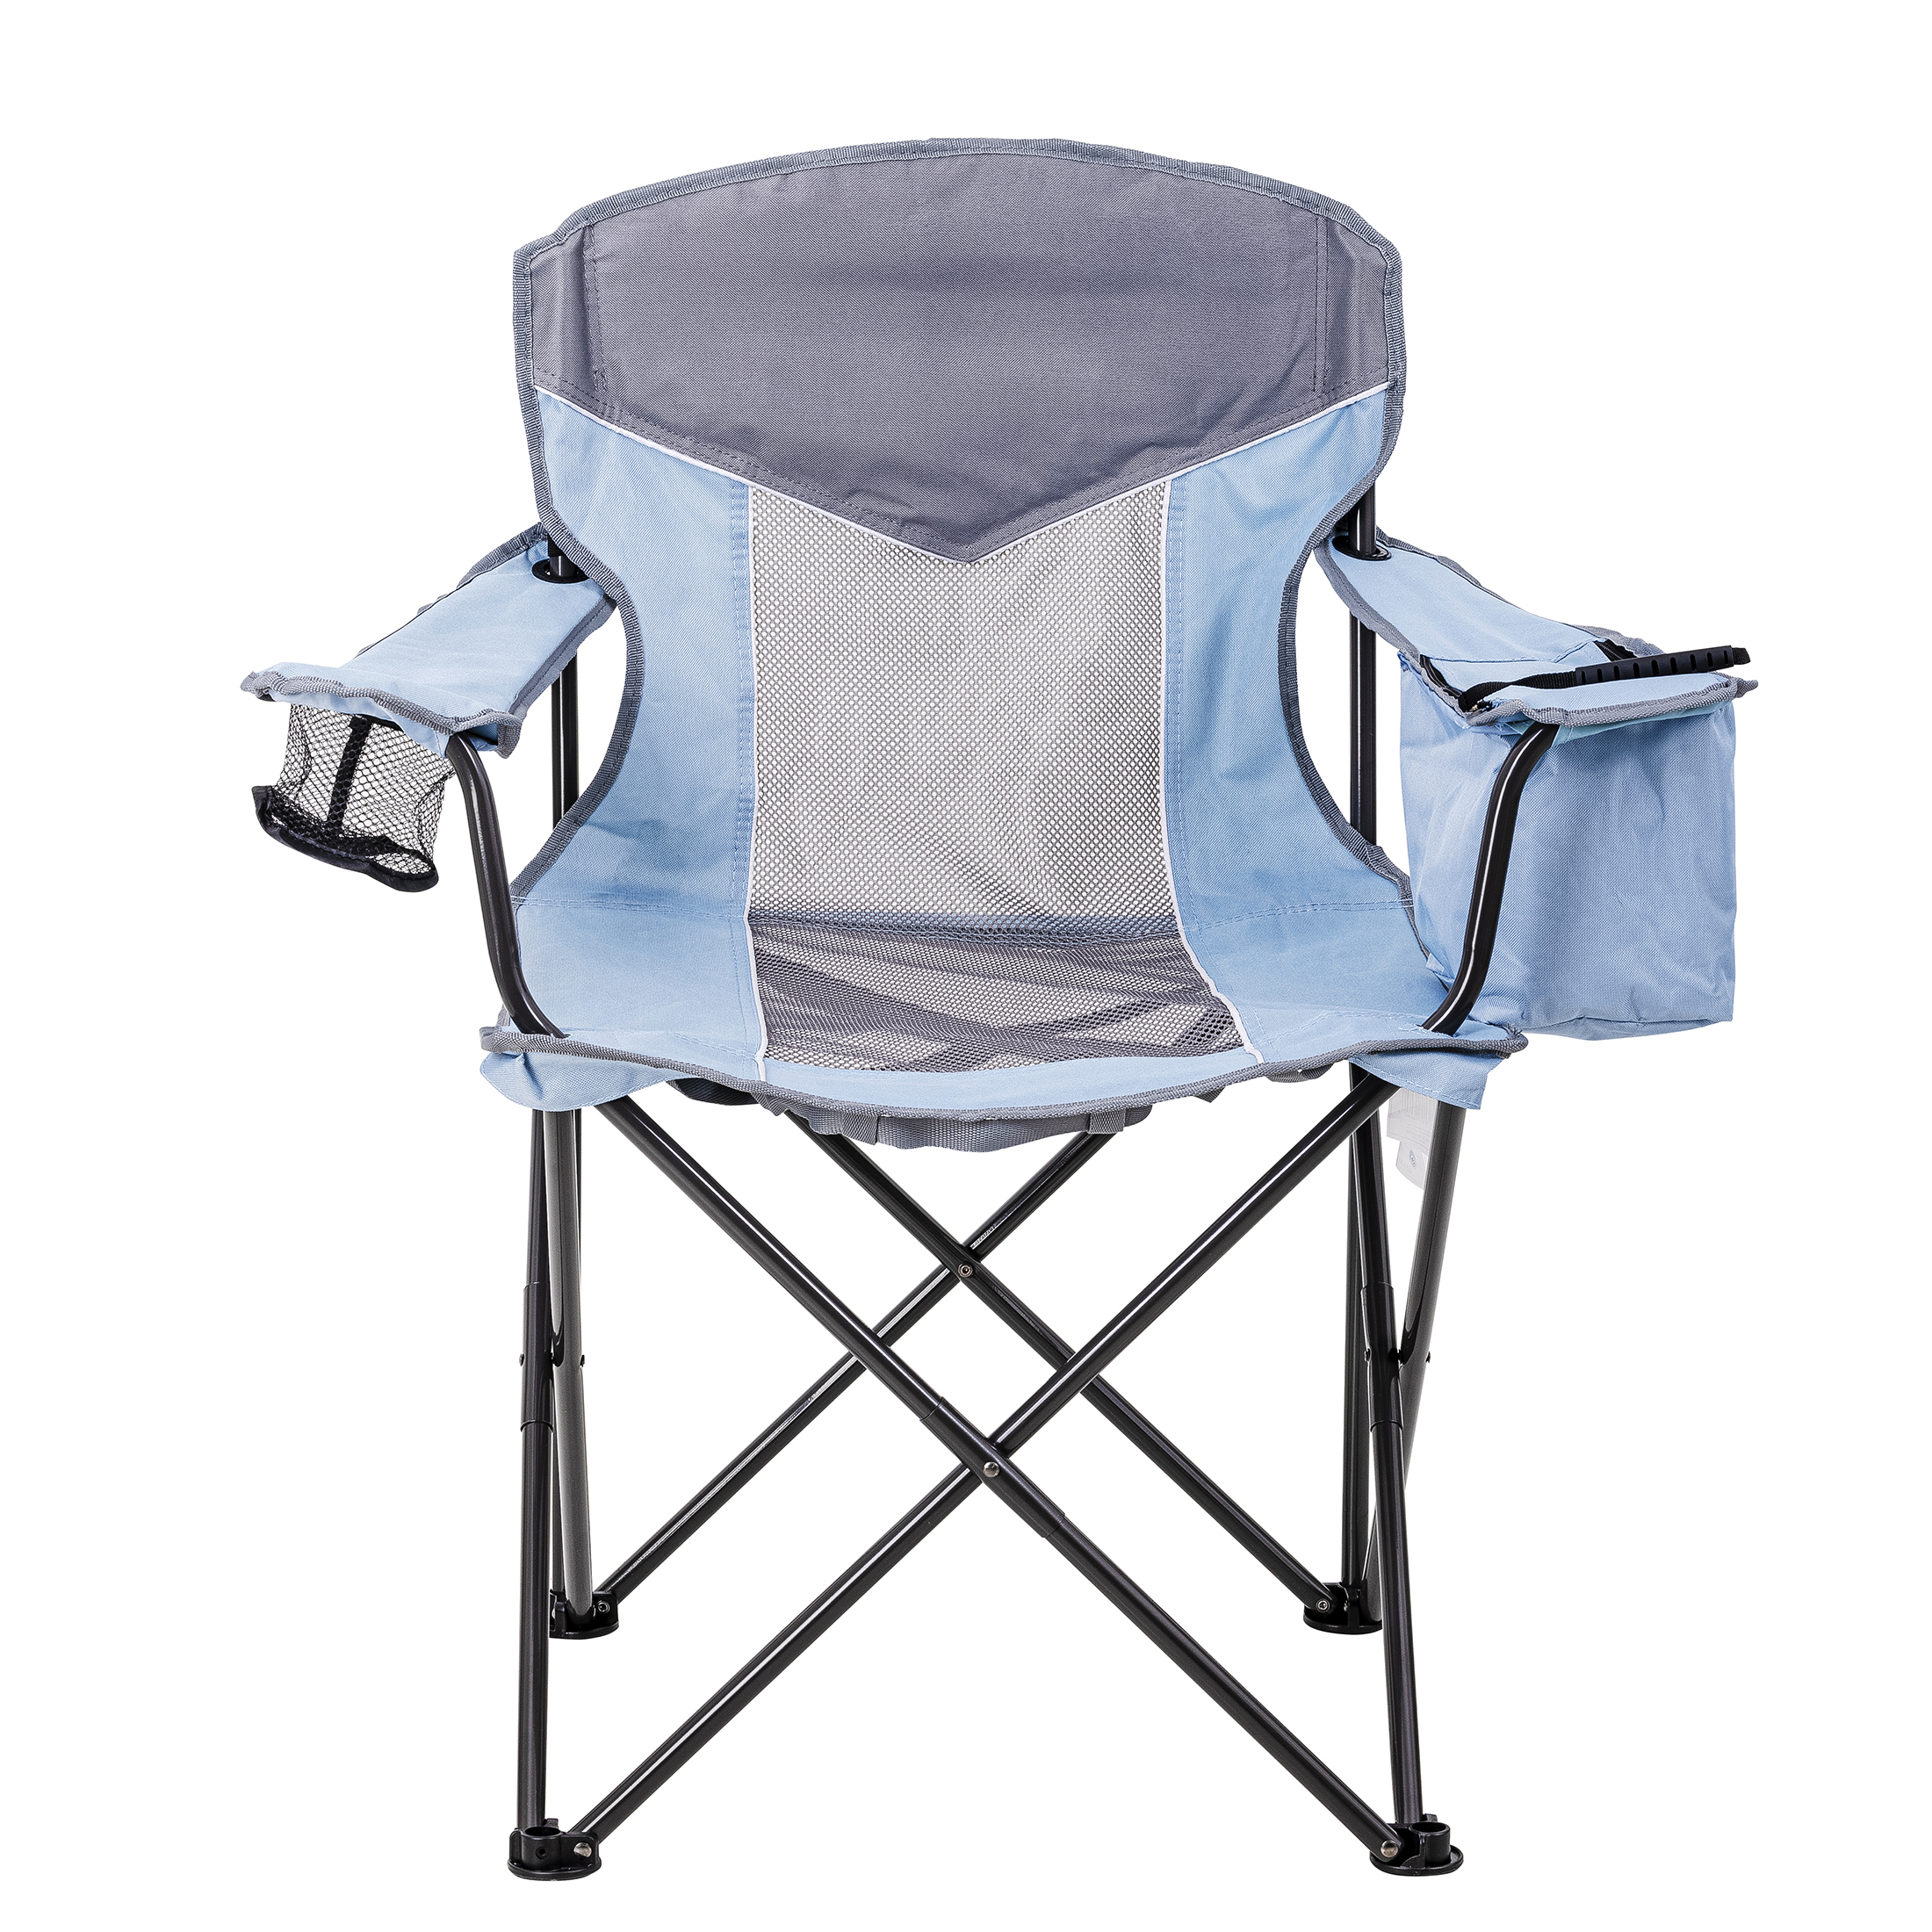 Ozark Trail Oversized Mesh Camp Chair with Cooler, Blue/Aqua and Grey, Adult - image 1 of 9